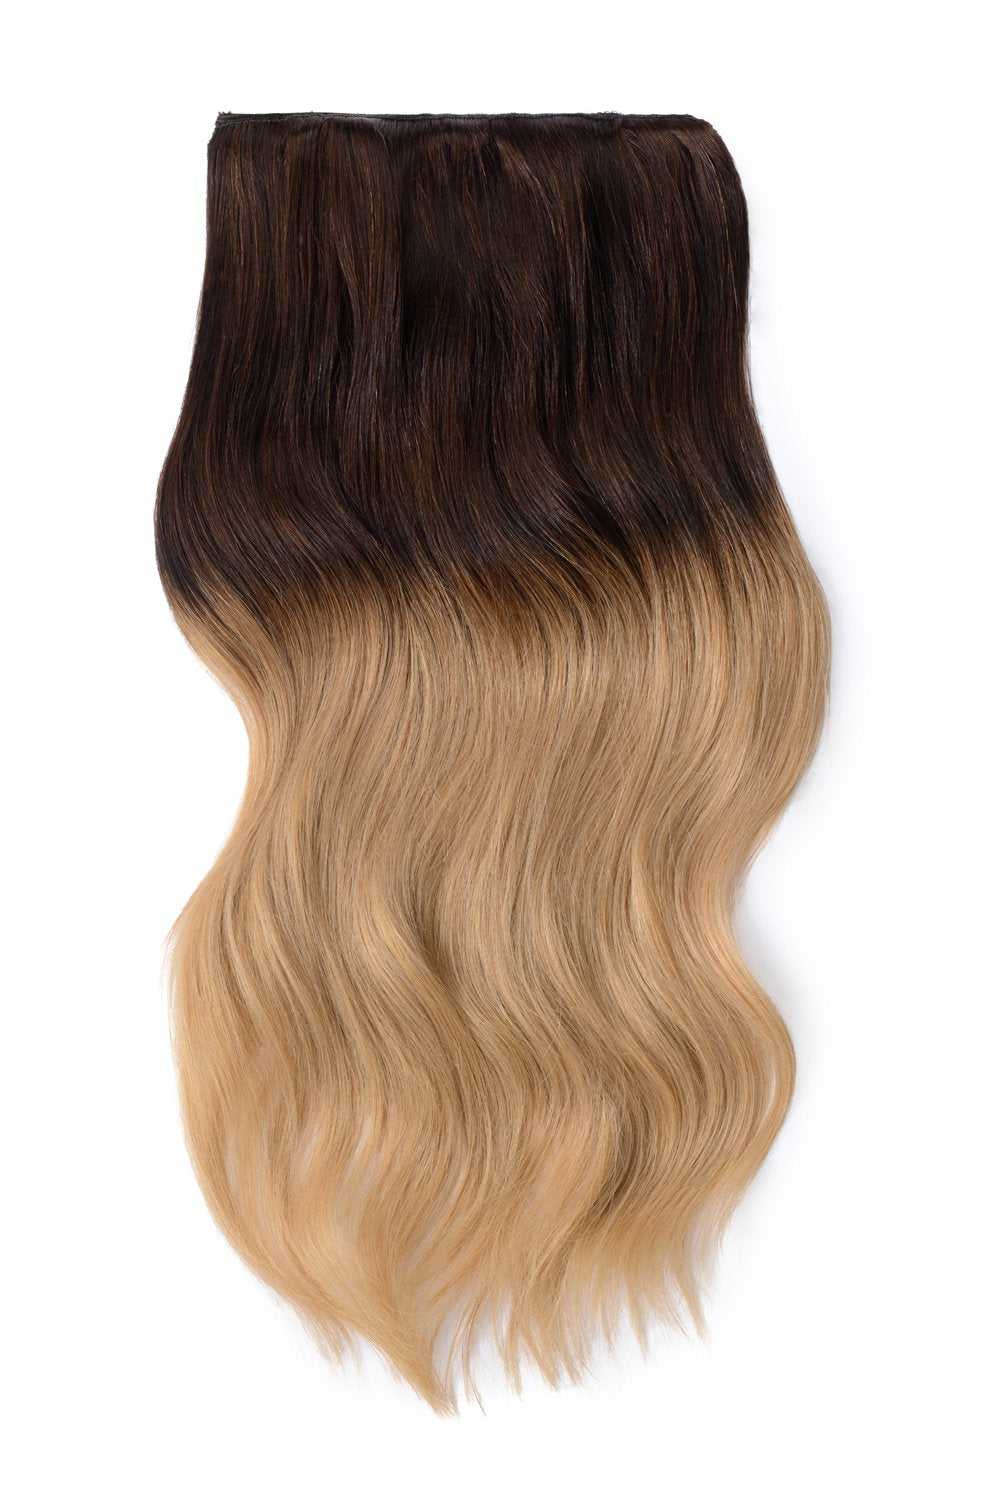 Shop Ombre Hair Extensions At Cliphair Us | Cliphair Us